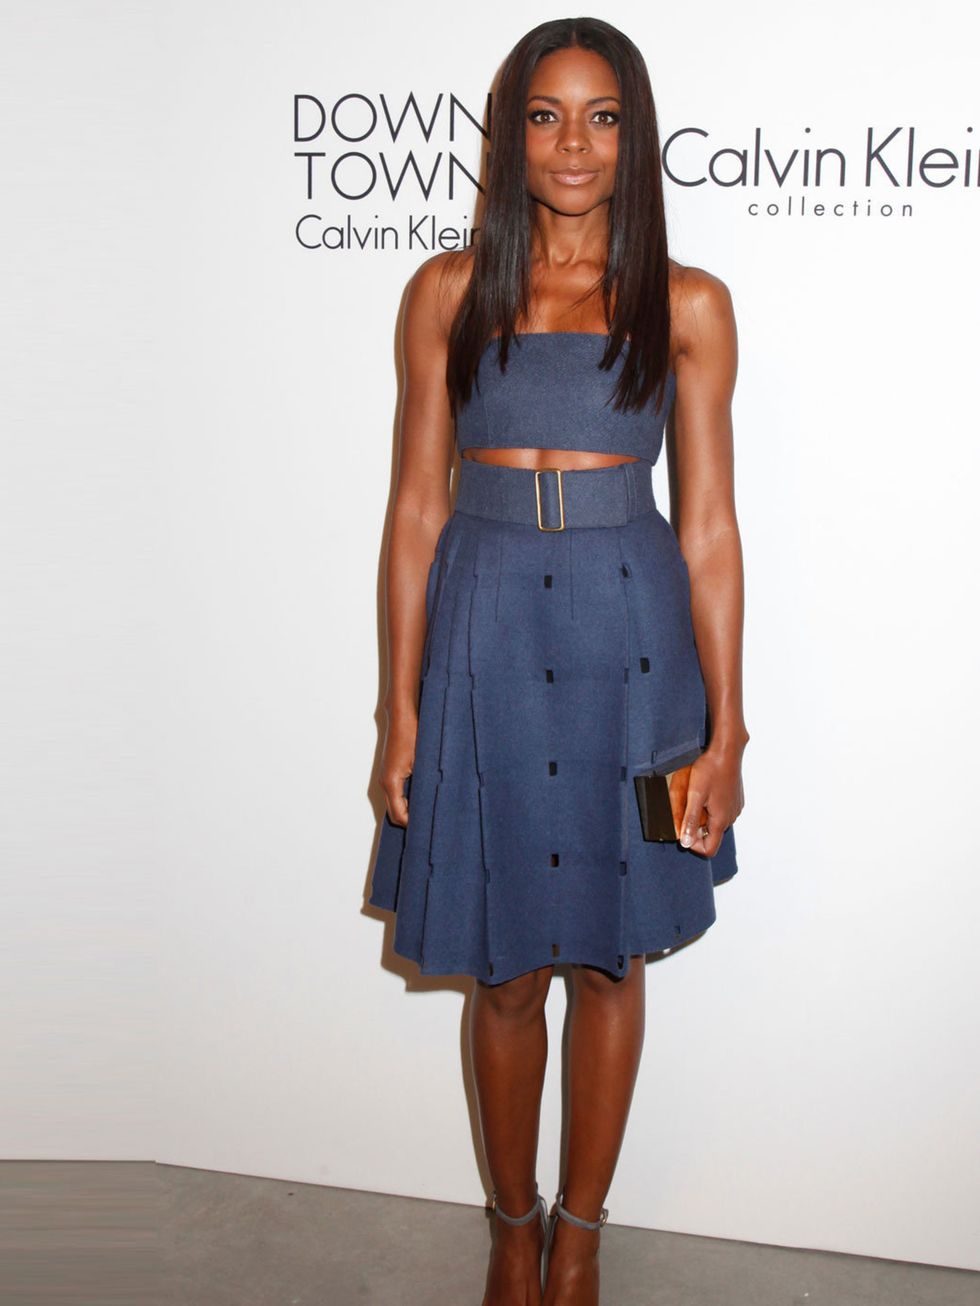 <p>Naomi Harris at the Calvin Klein show after party, New York Fashion Week, September 2013. </p><p><em><a href="http://www.elleuk.com/catwalk">Latest SS14 catwalk reports</a></em></p><p><em><a href="http://www.elleuk.com/fashion/trends/fashion-month-s-s-